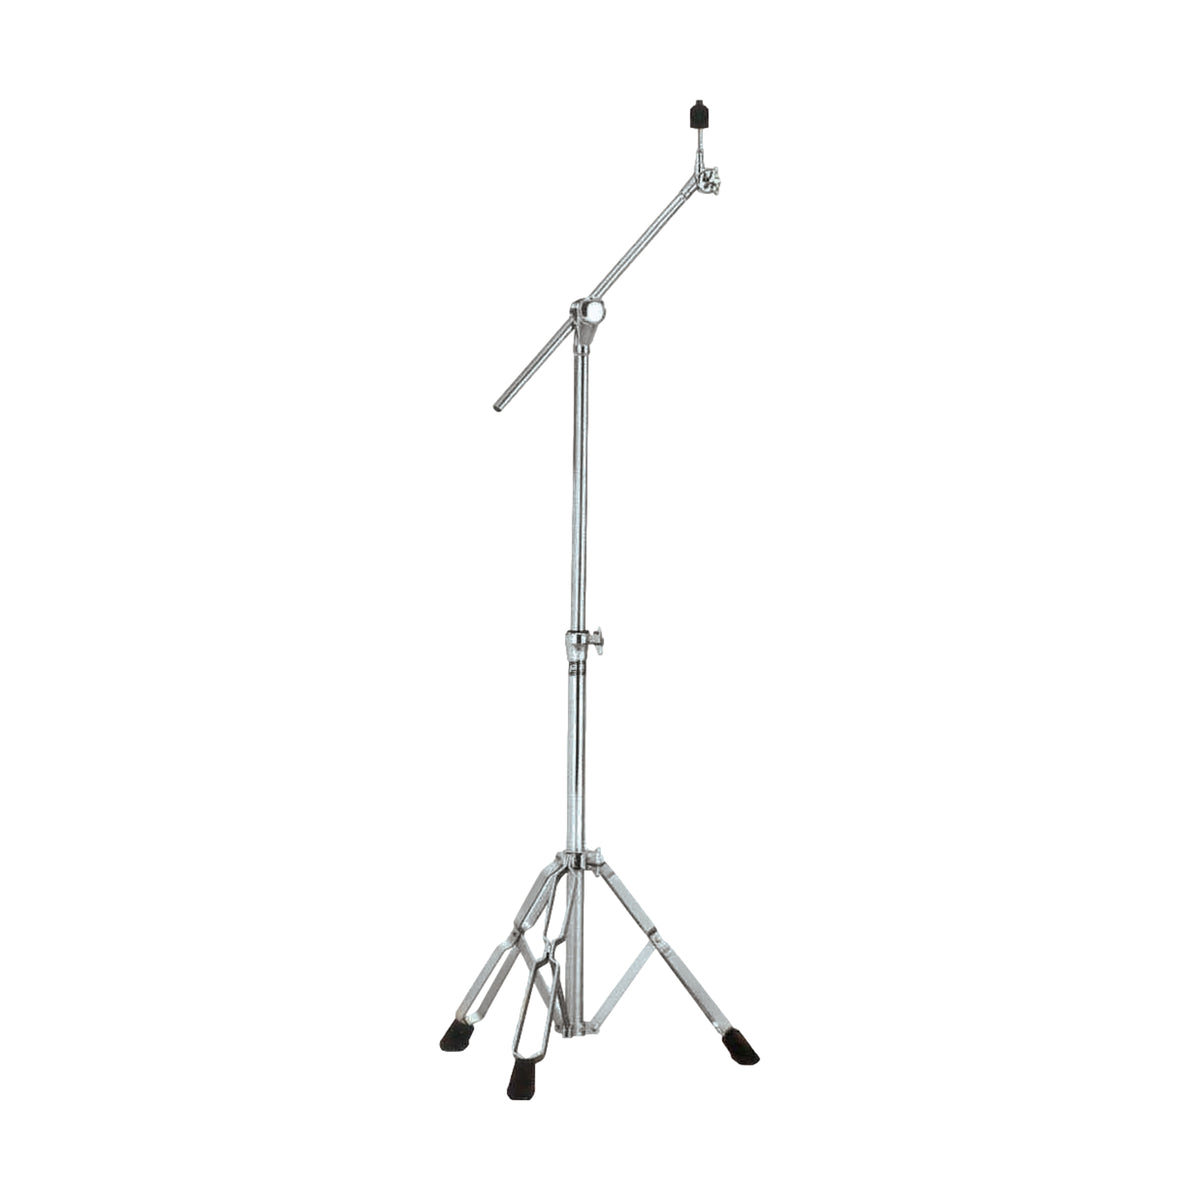 DXP Heavy Duty Straight Cymbal Stand